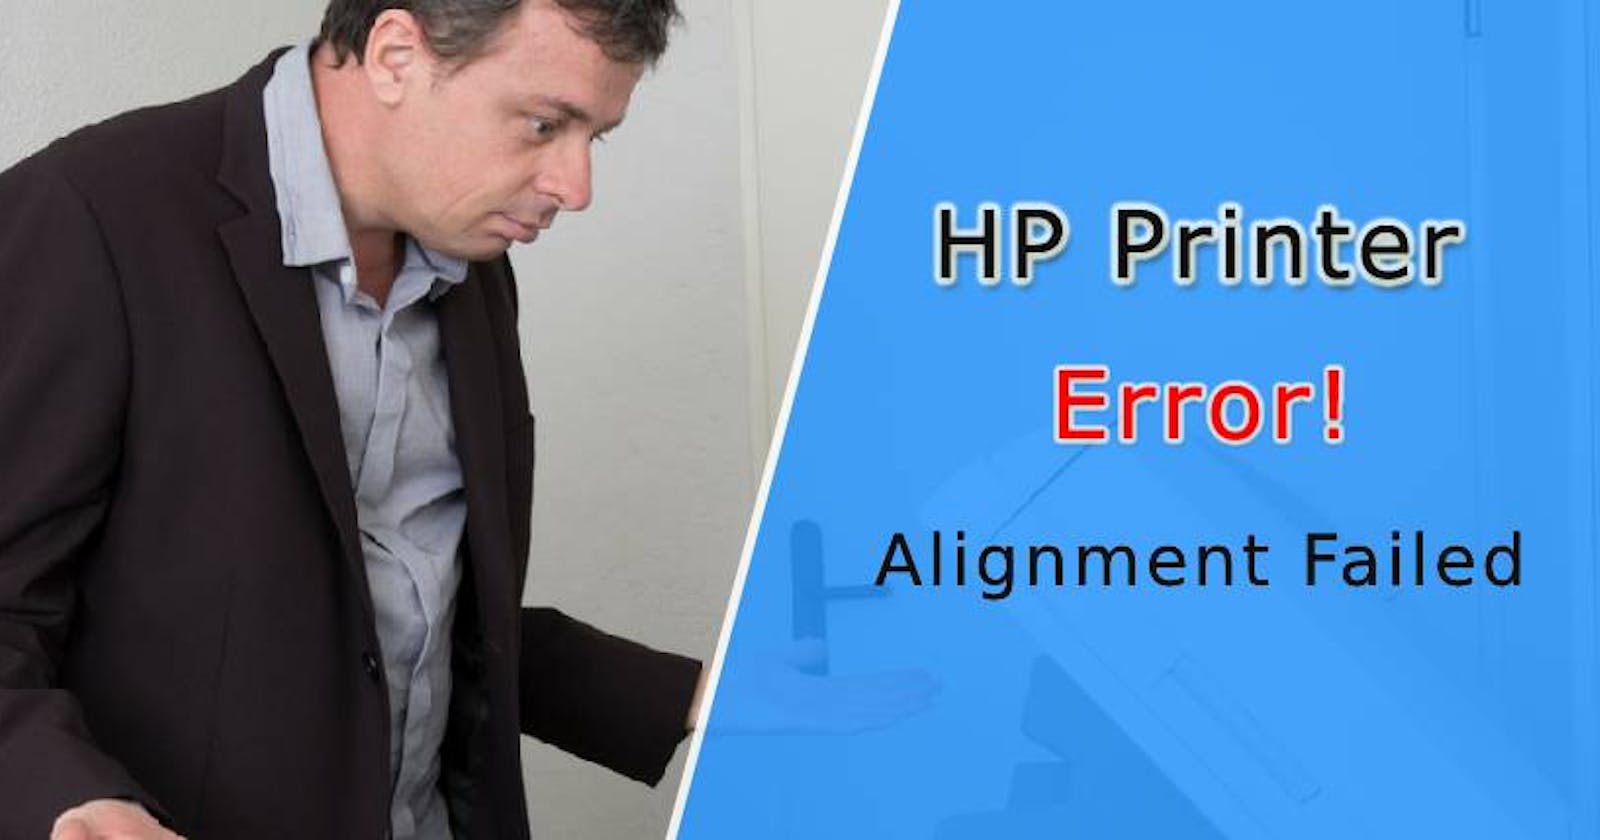 How Can I Resolve Alignment Error on HP Printers?